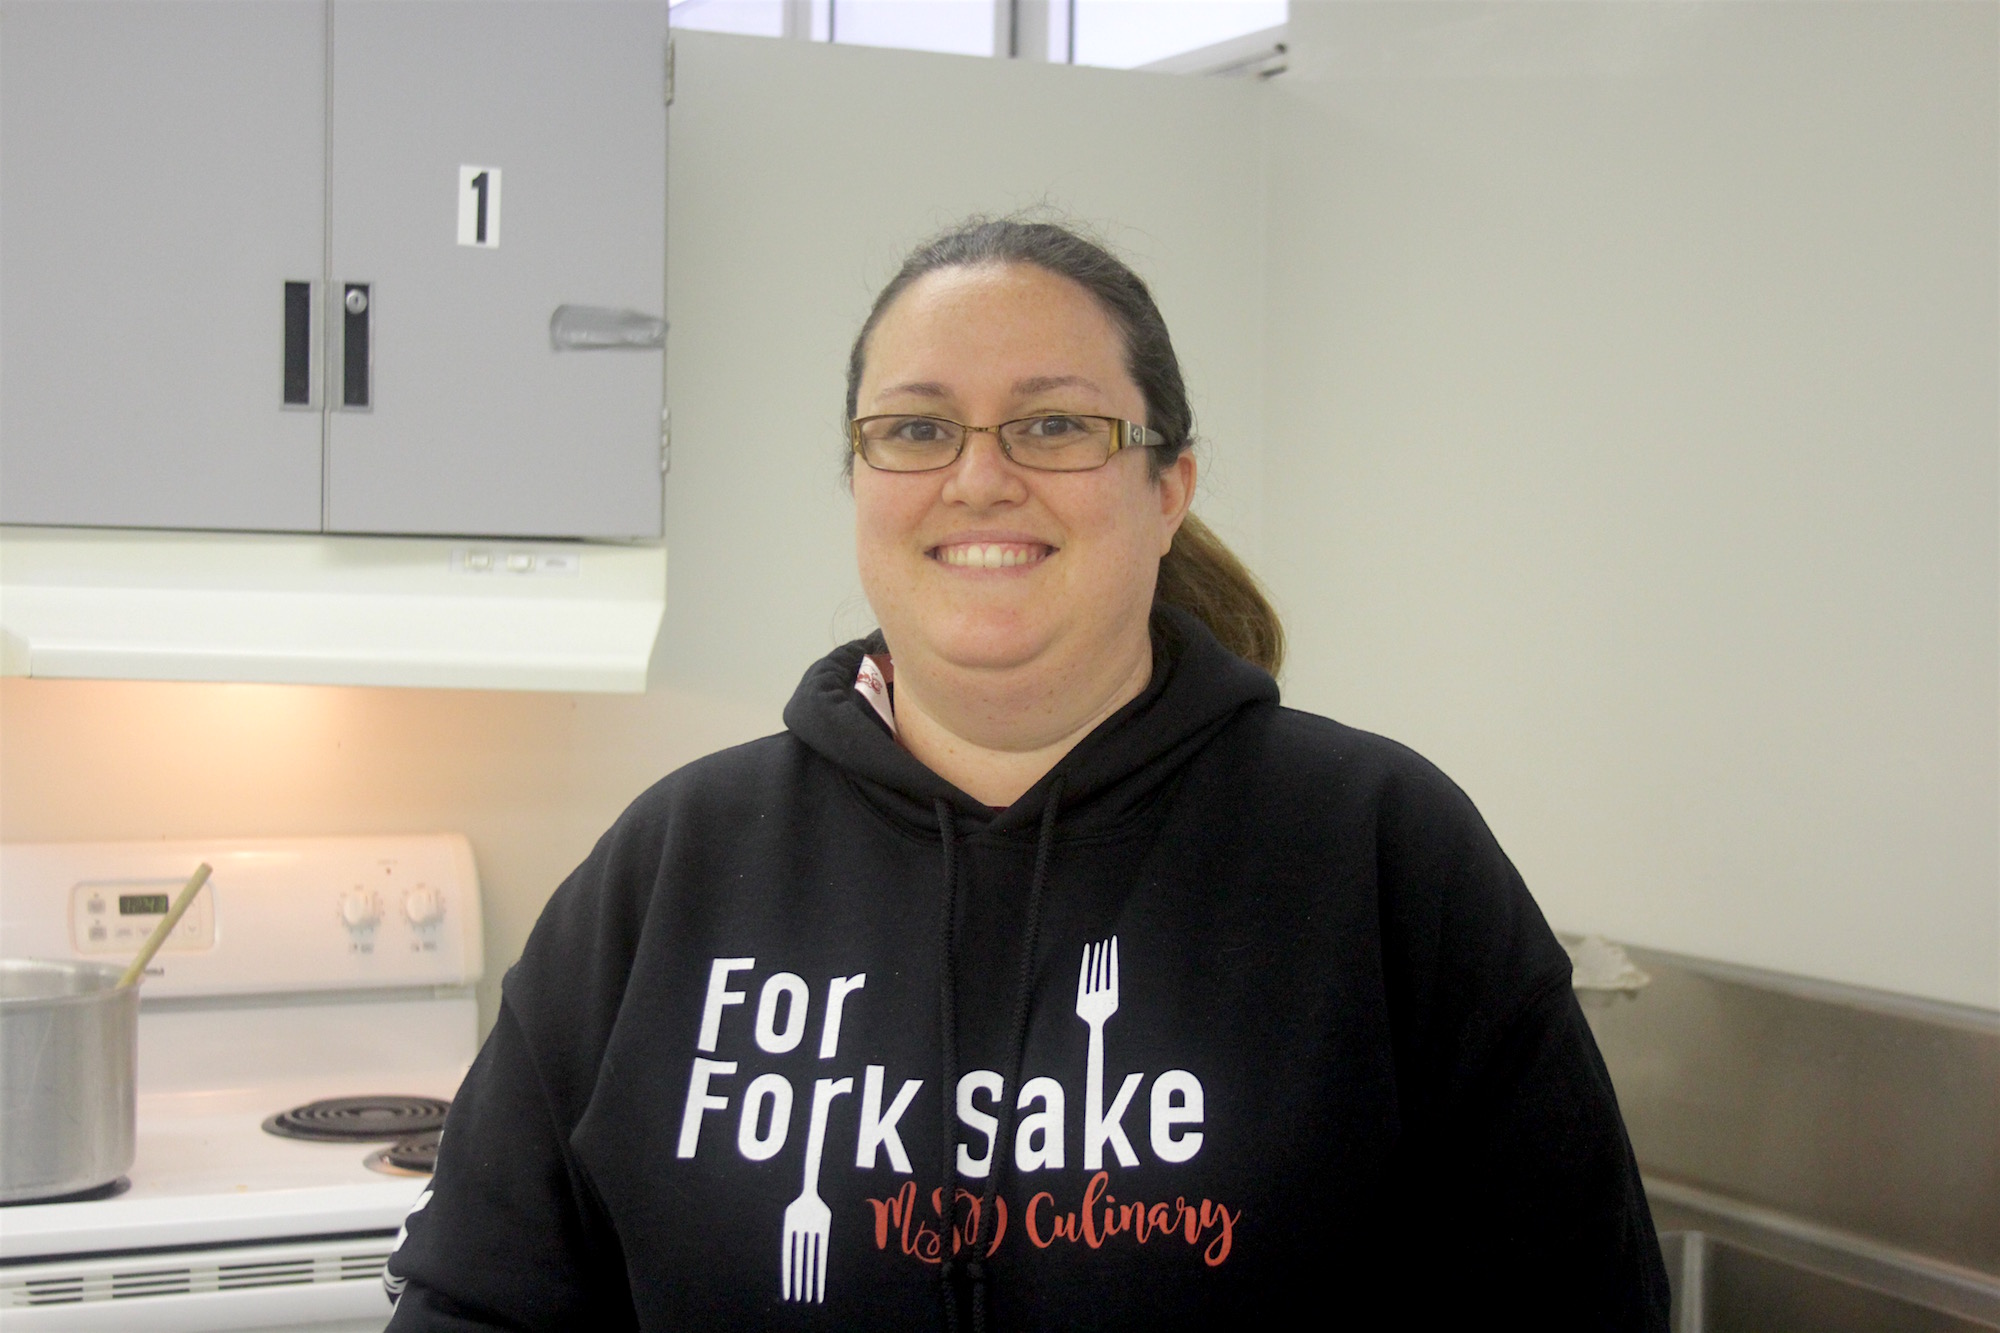 Culinary arts teacher Ashley Kurth shares her story from Feb. 14. Photo by Mallory Muller